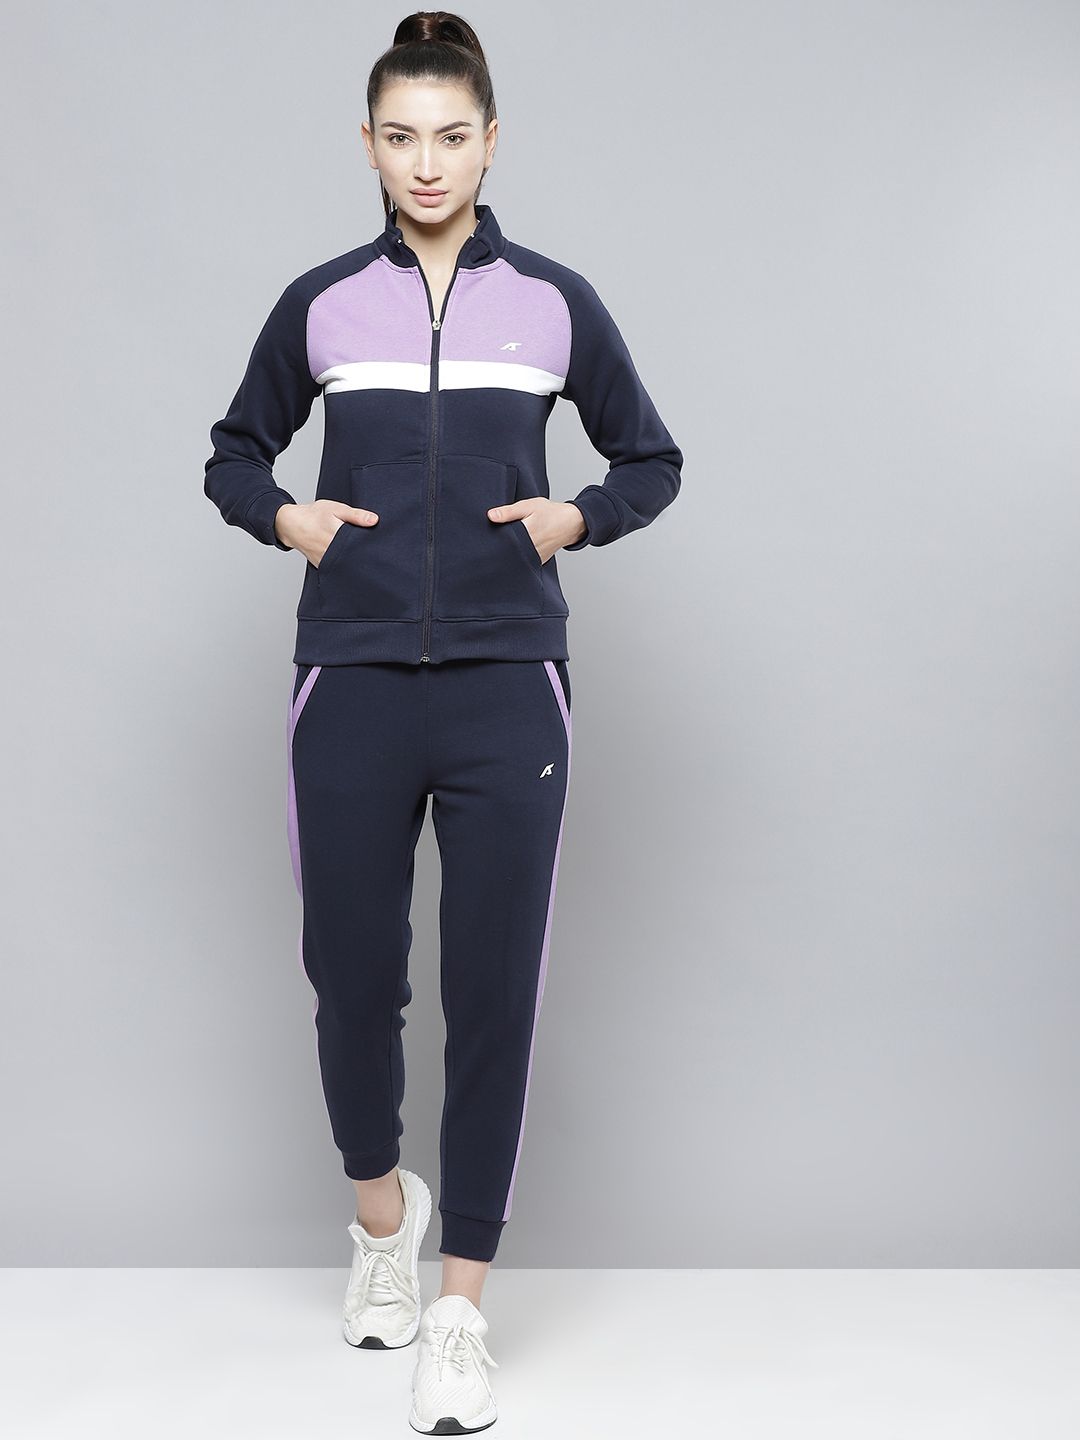 Alcis Women Navy Blue & Lavender Solid Knitted Tracksuit with Side Stripes Price in India